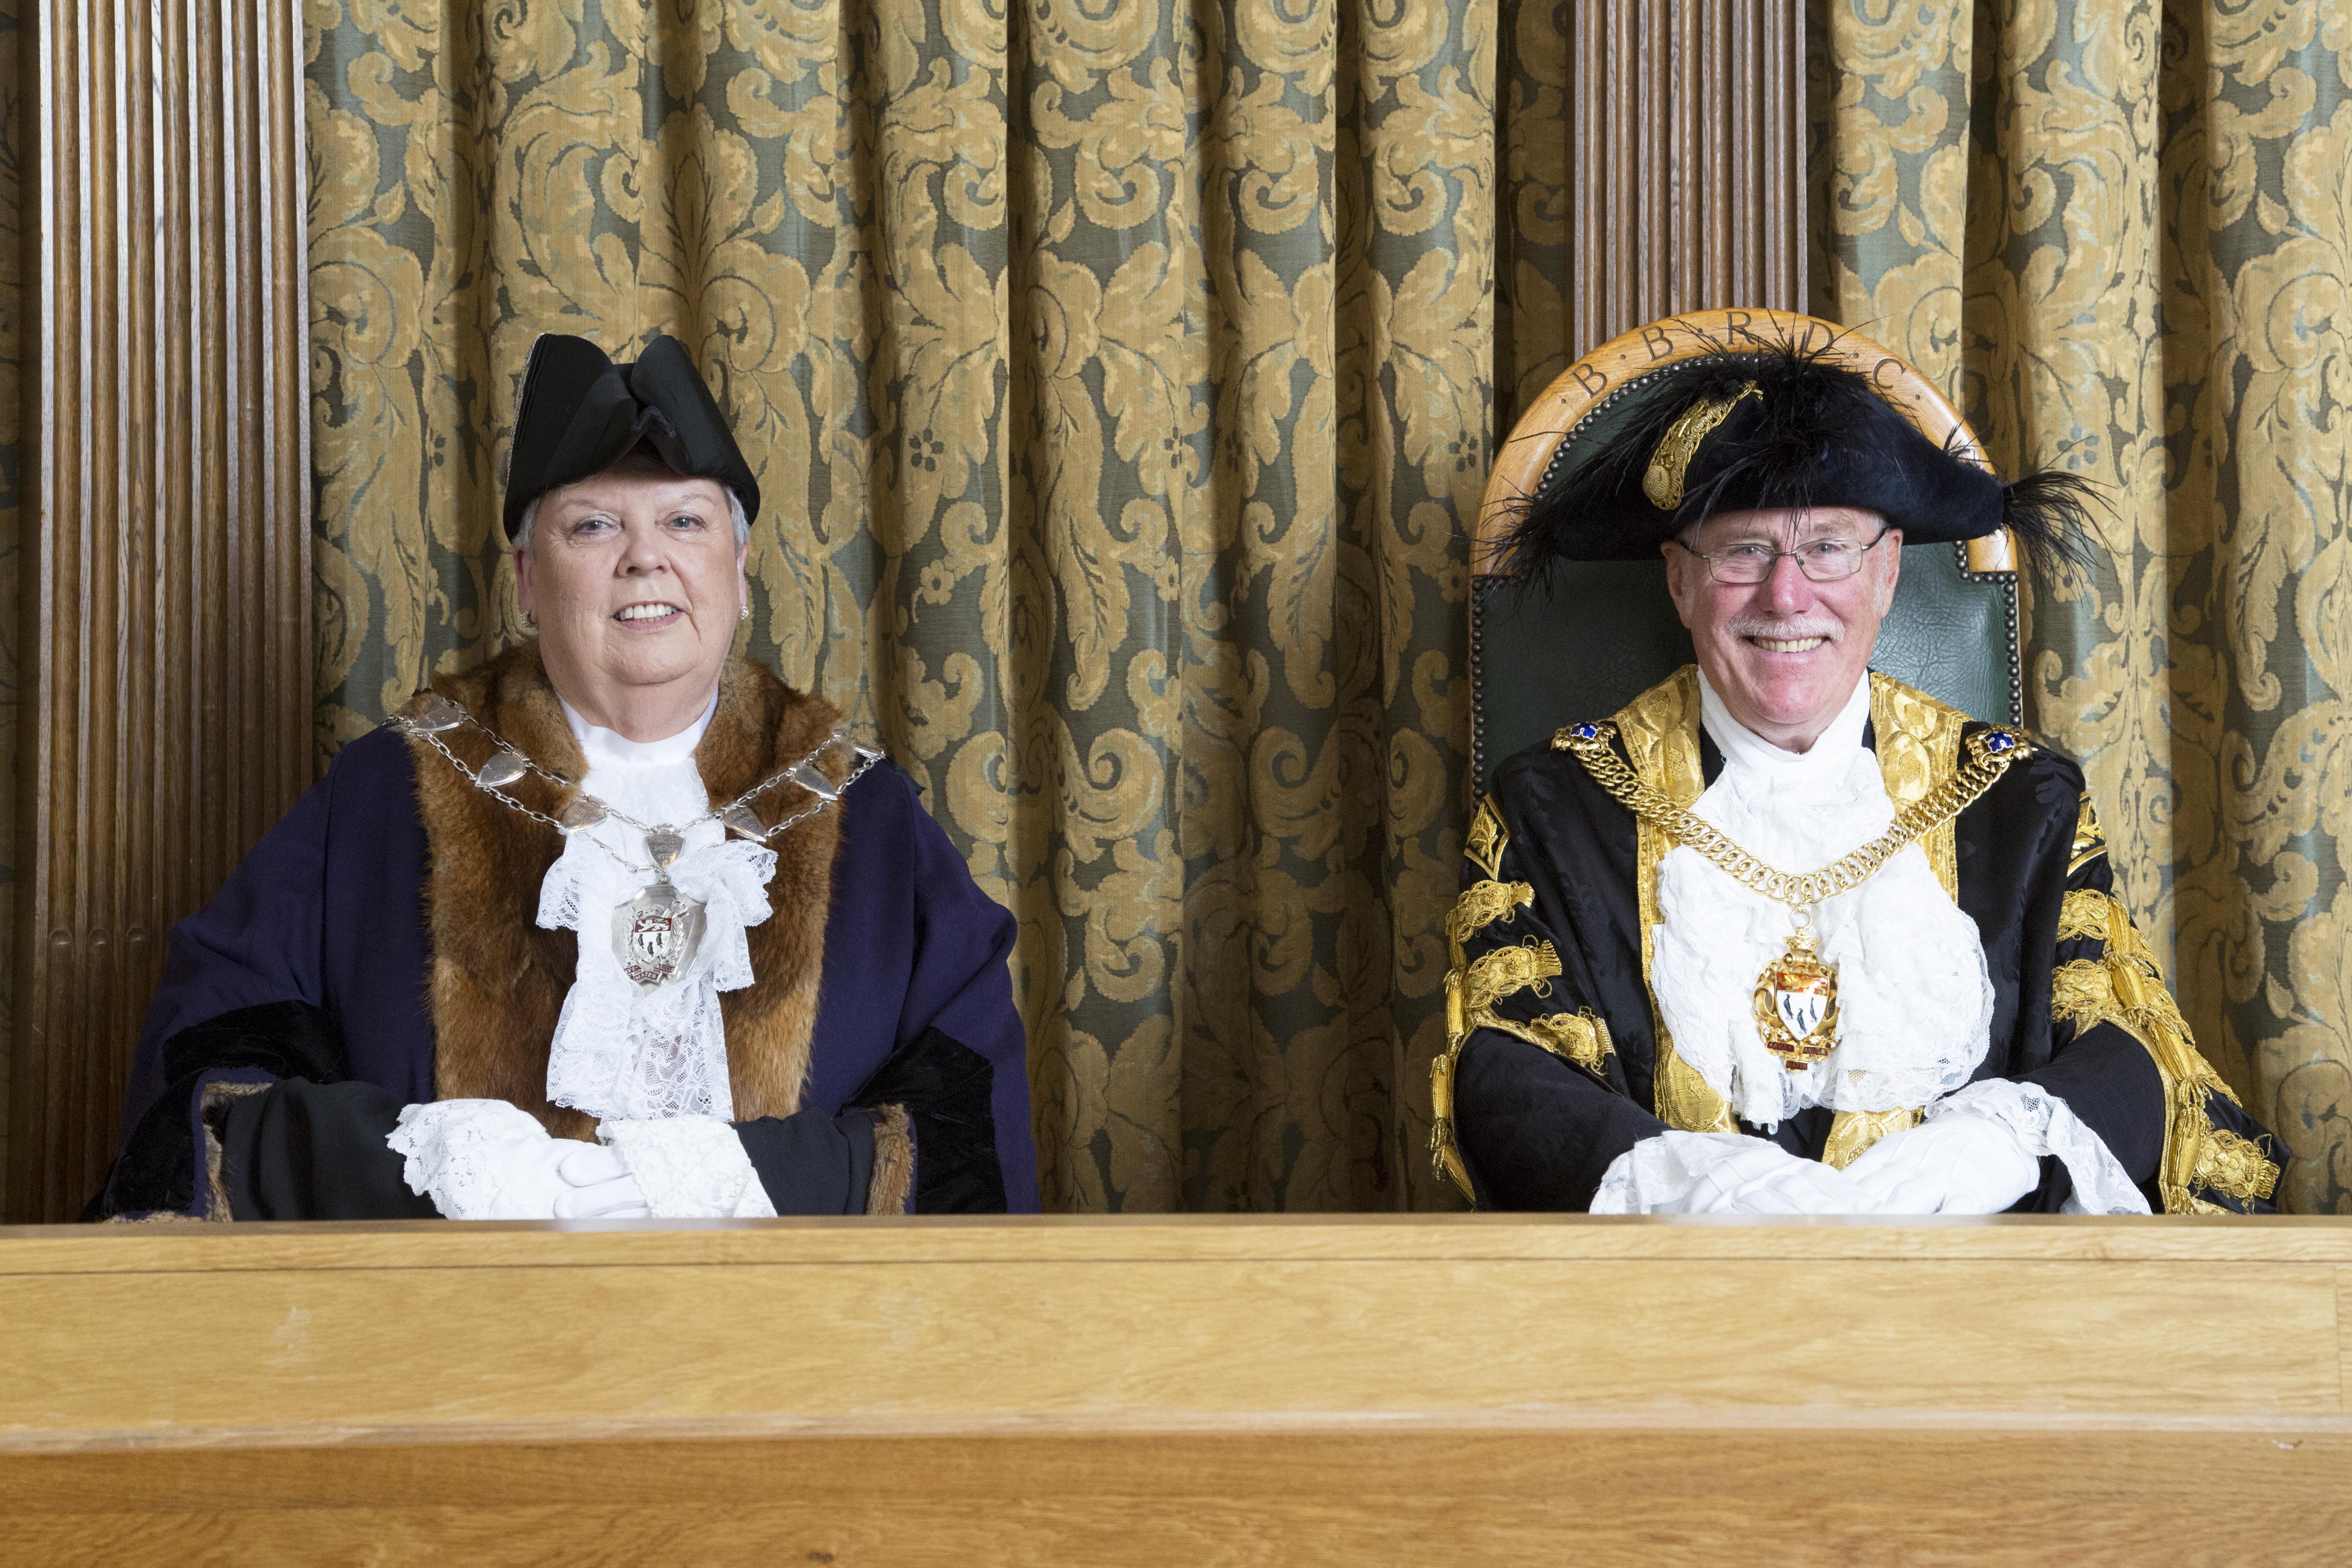 Records broken as councillor elected Lord Mayor for fourth time